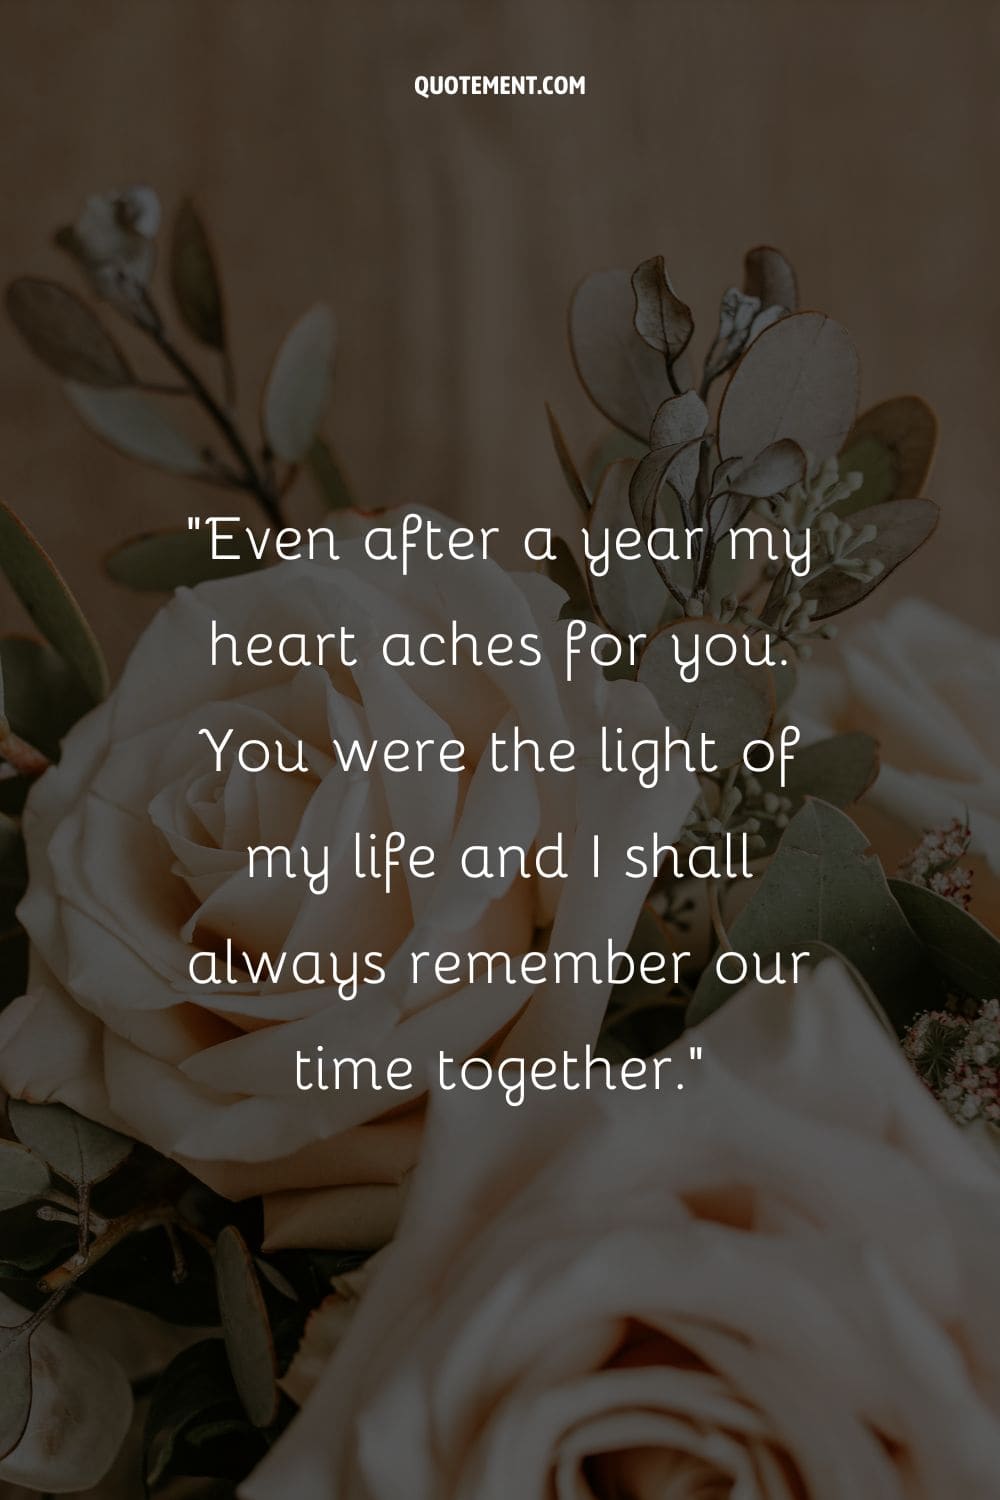 One year memorial quote for a deceased spouse.